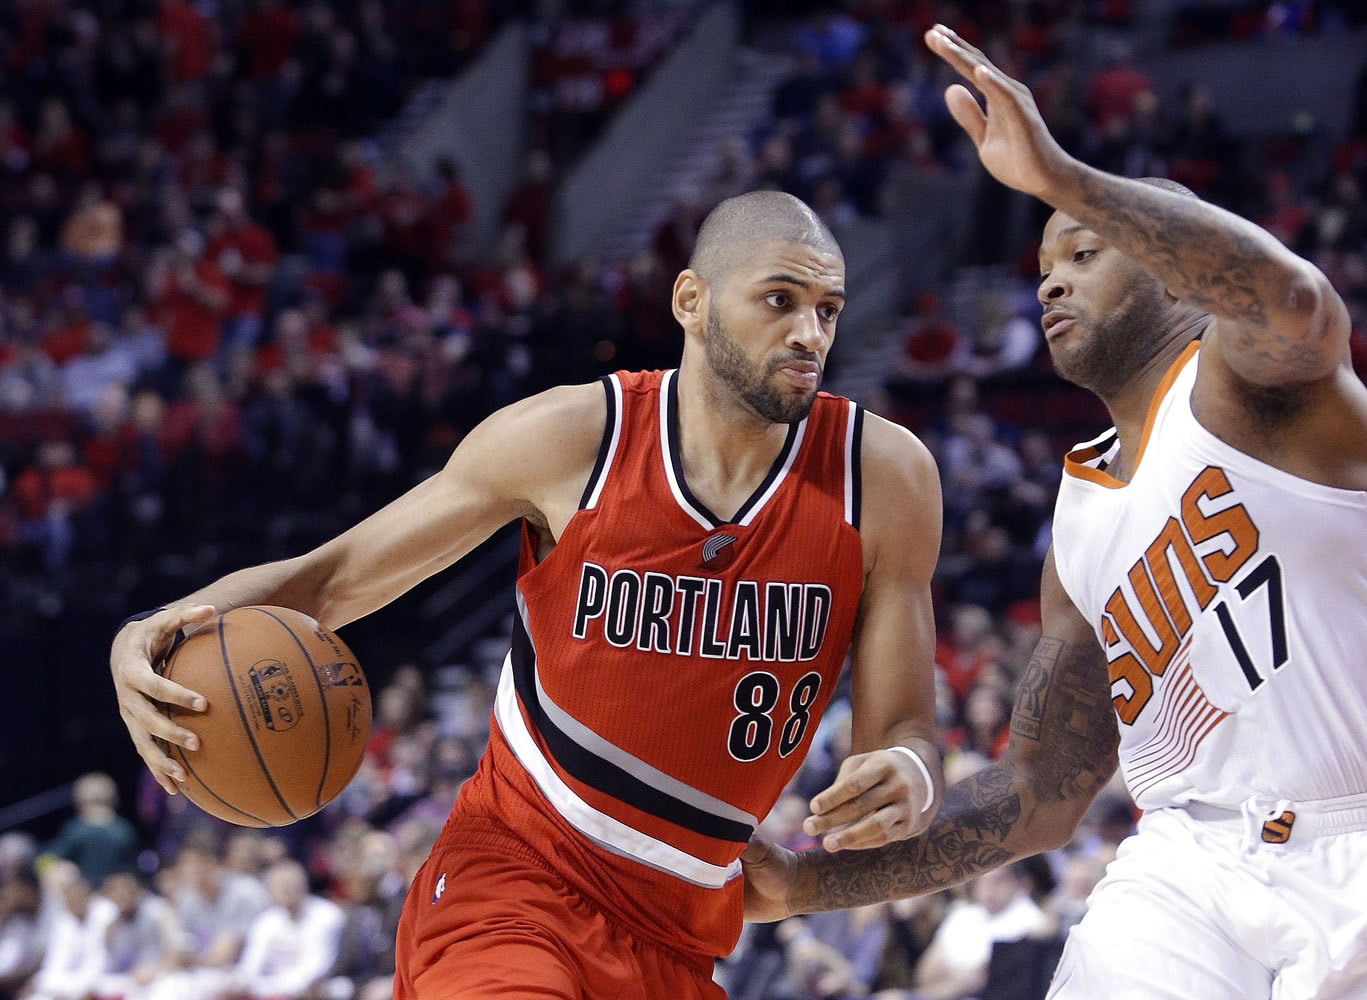 Portland's Nicolas Batum drives on Phoenix Suns forward P.J. Tucker during the second half Thursday. Batum topped the Trail Blazers with 20 points to go with seven assists as they defeated the Suns 108-87.